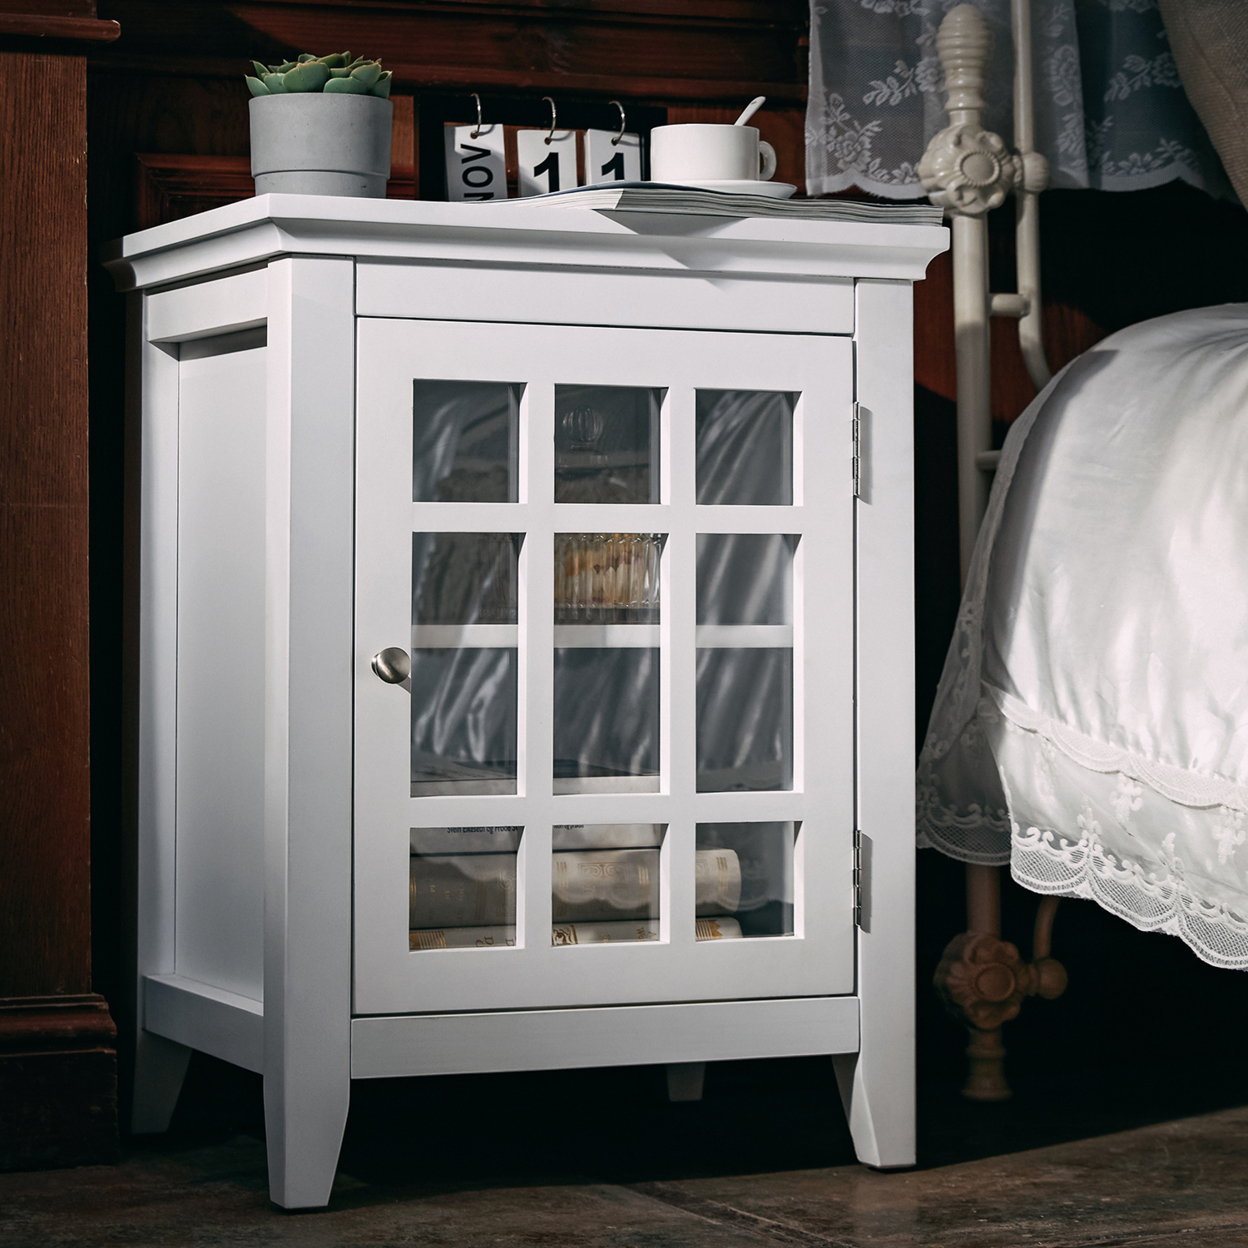 26.4' Tall Solid Wood Nightstand in White